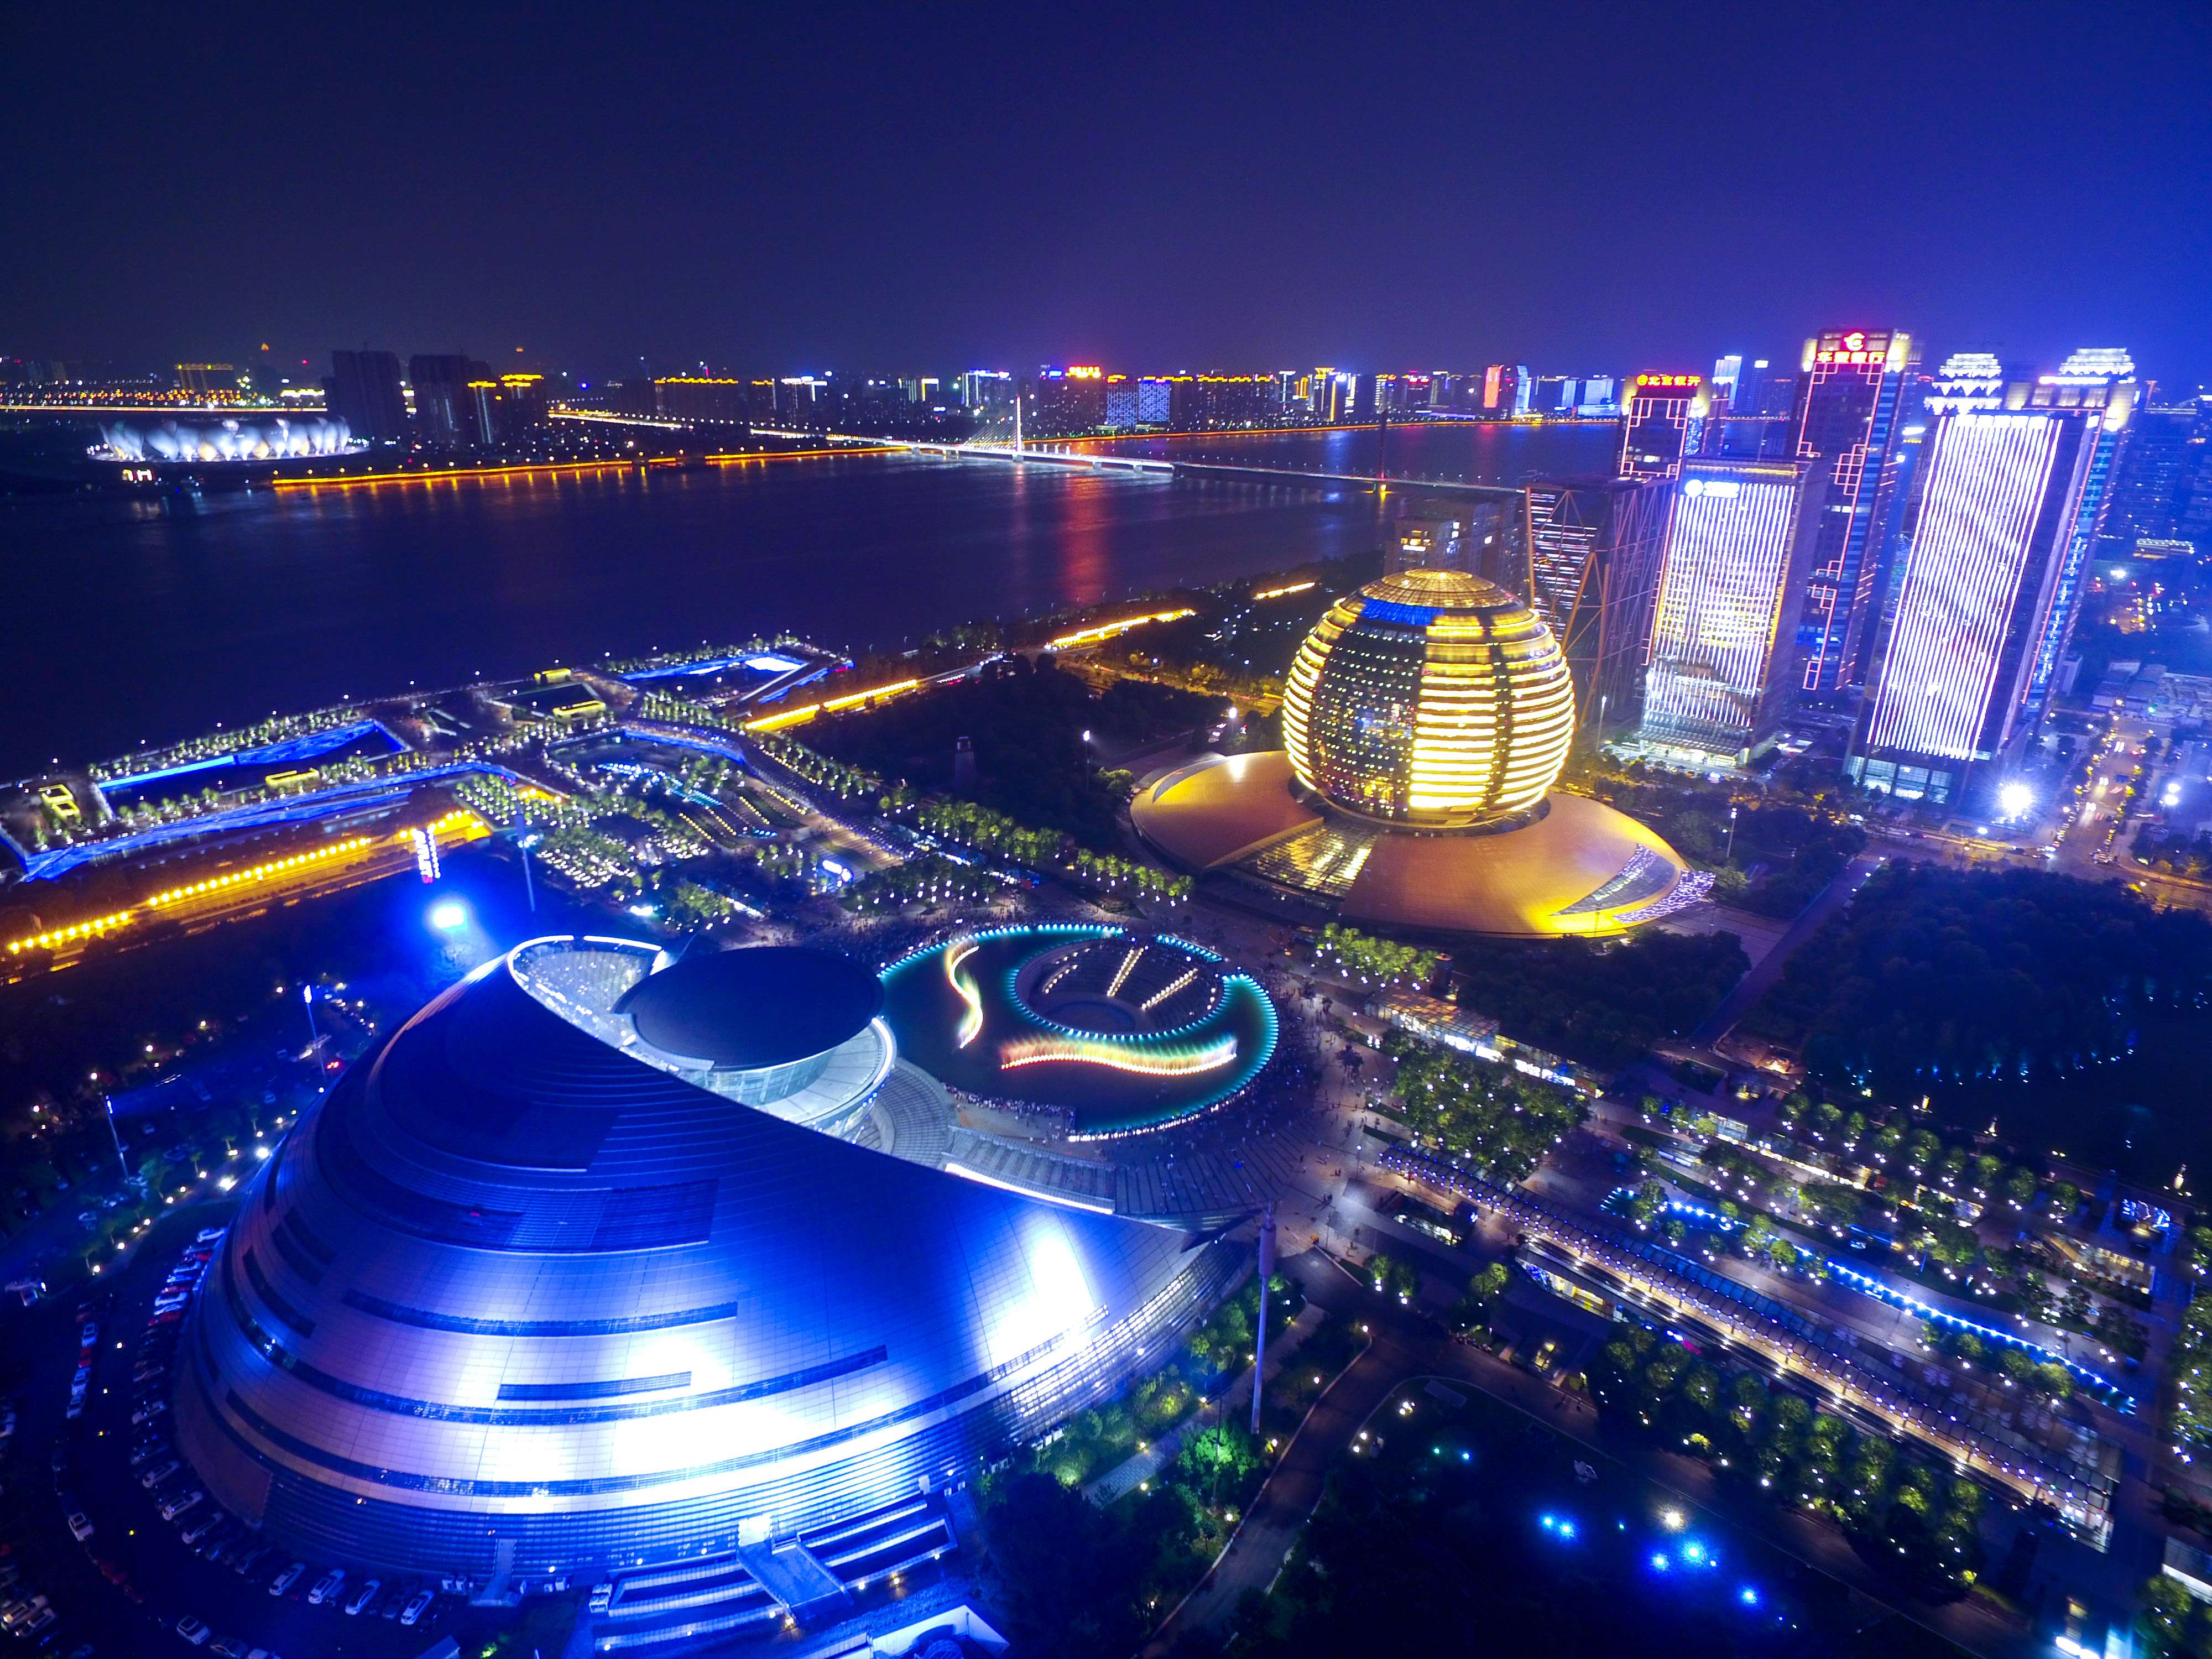 The venues of the B20 and G20 conferences sit across the Qiantang river from each other in Hangzhou. Photo: Imaginechina